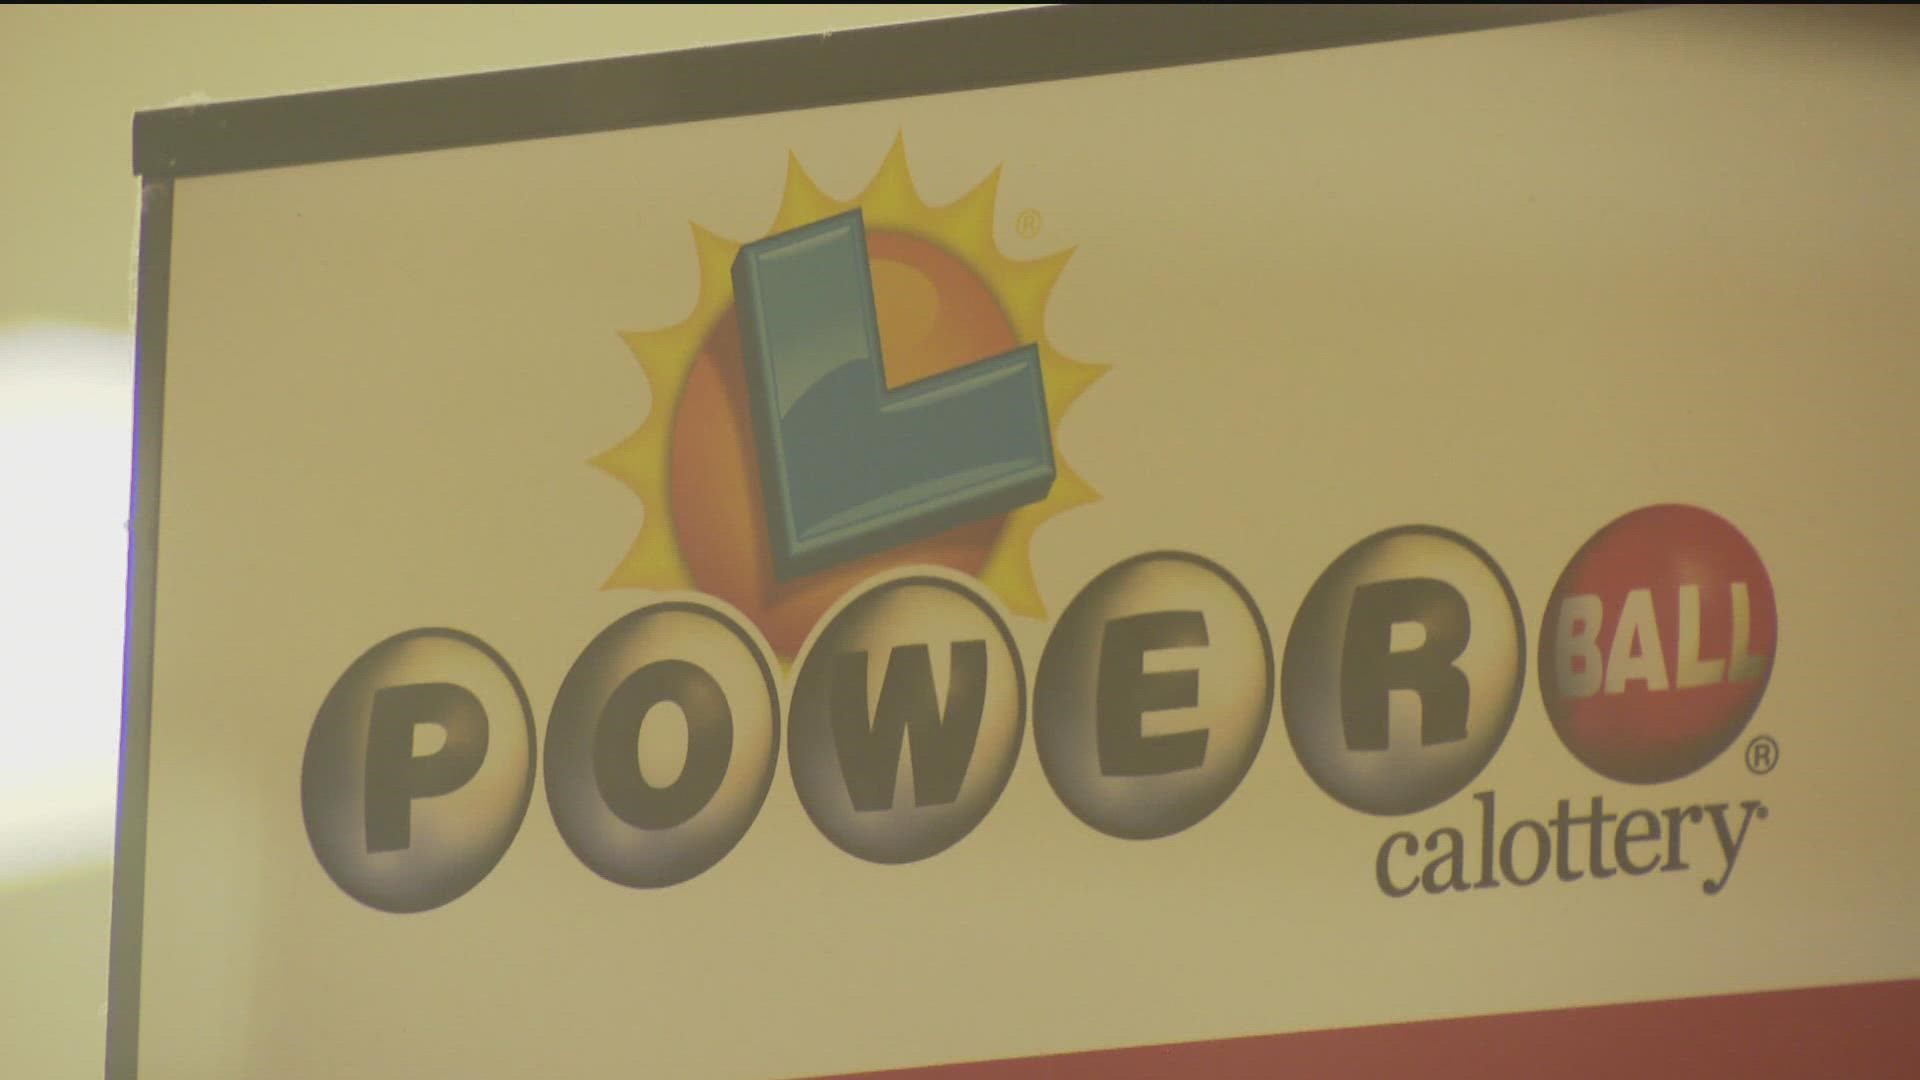 A ticket with five matching Powerball Jackpot numbers was purchased at a Rite Aid in Encinitas.